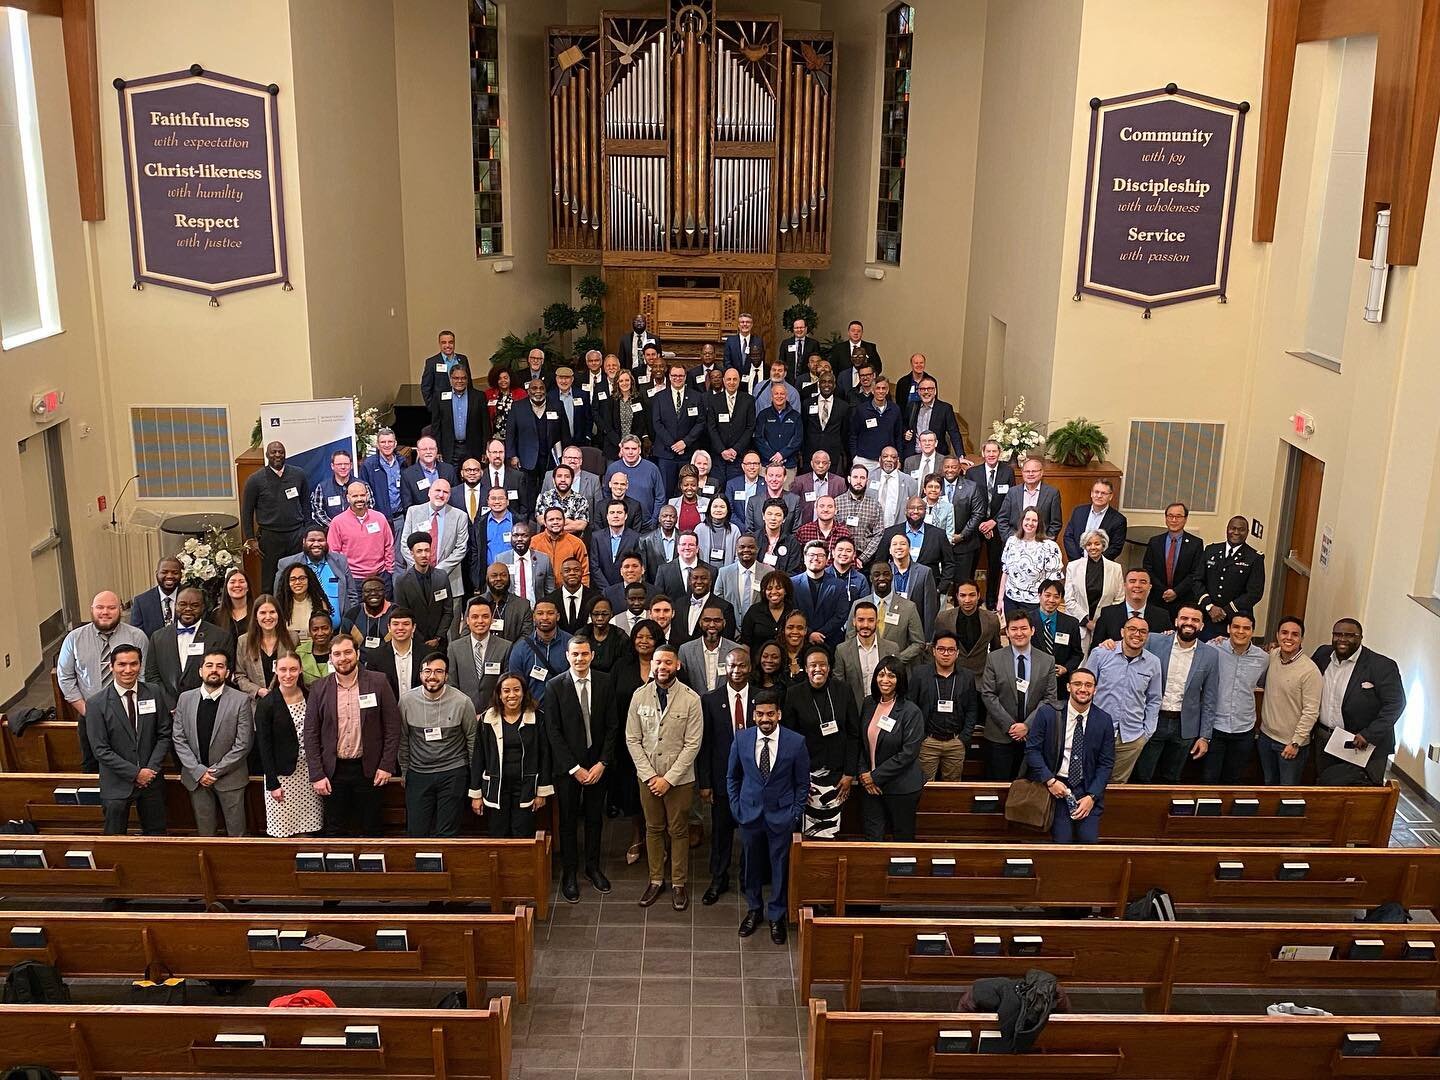 Ministry Opportunity Days began early this morning, as Ministerial Directors and administrators from all across North America have come to meet, interview, and hire a next generation of Seminarians and Pastors, who have been equipped for pastoral min